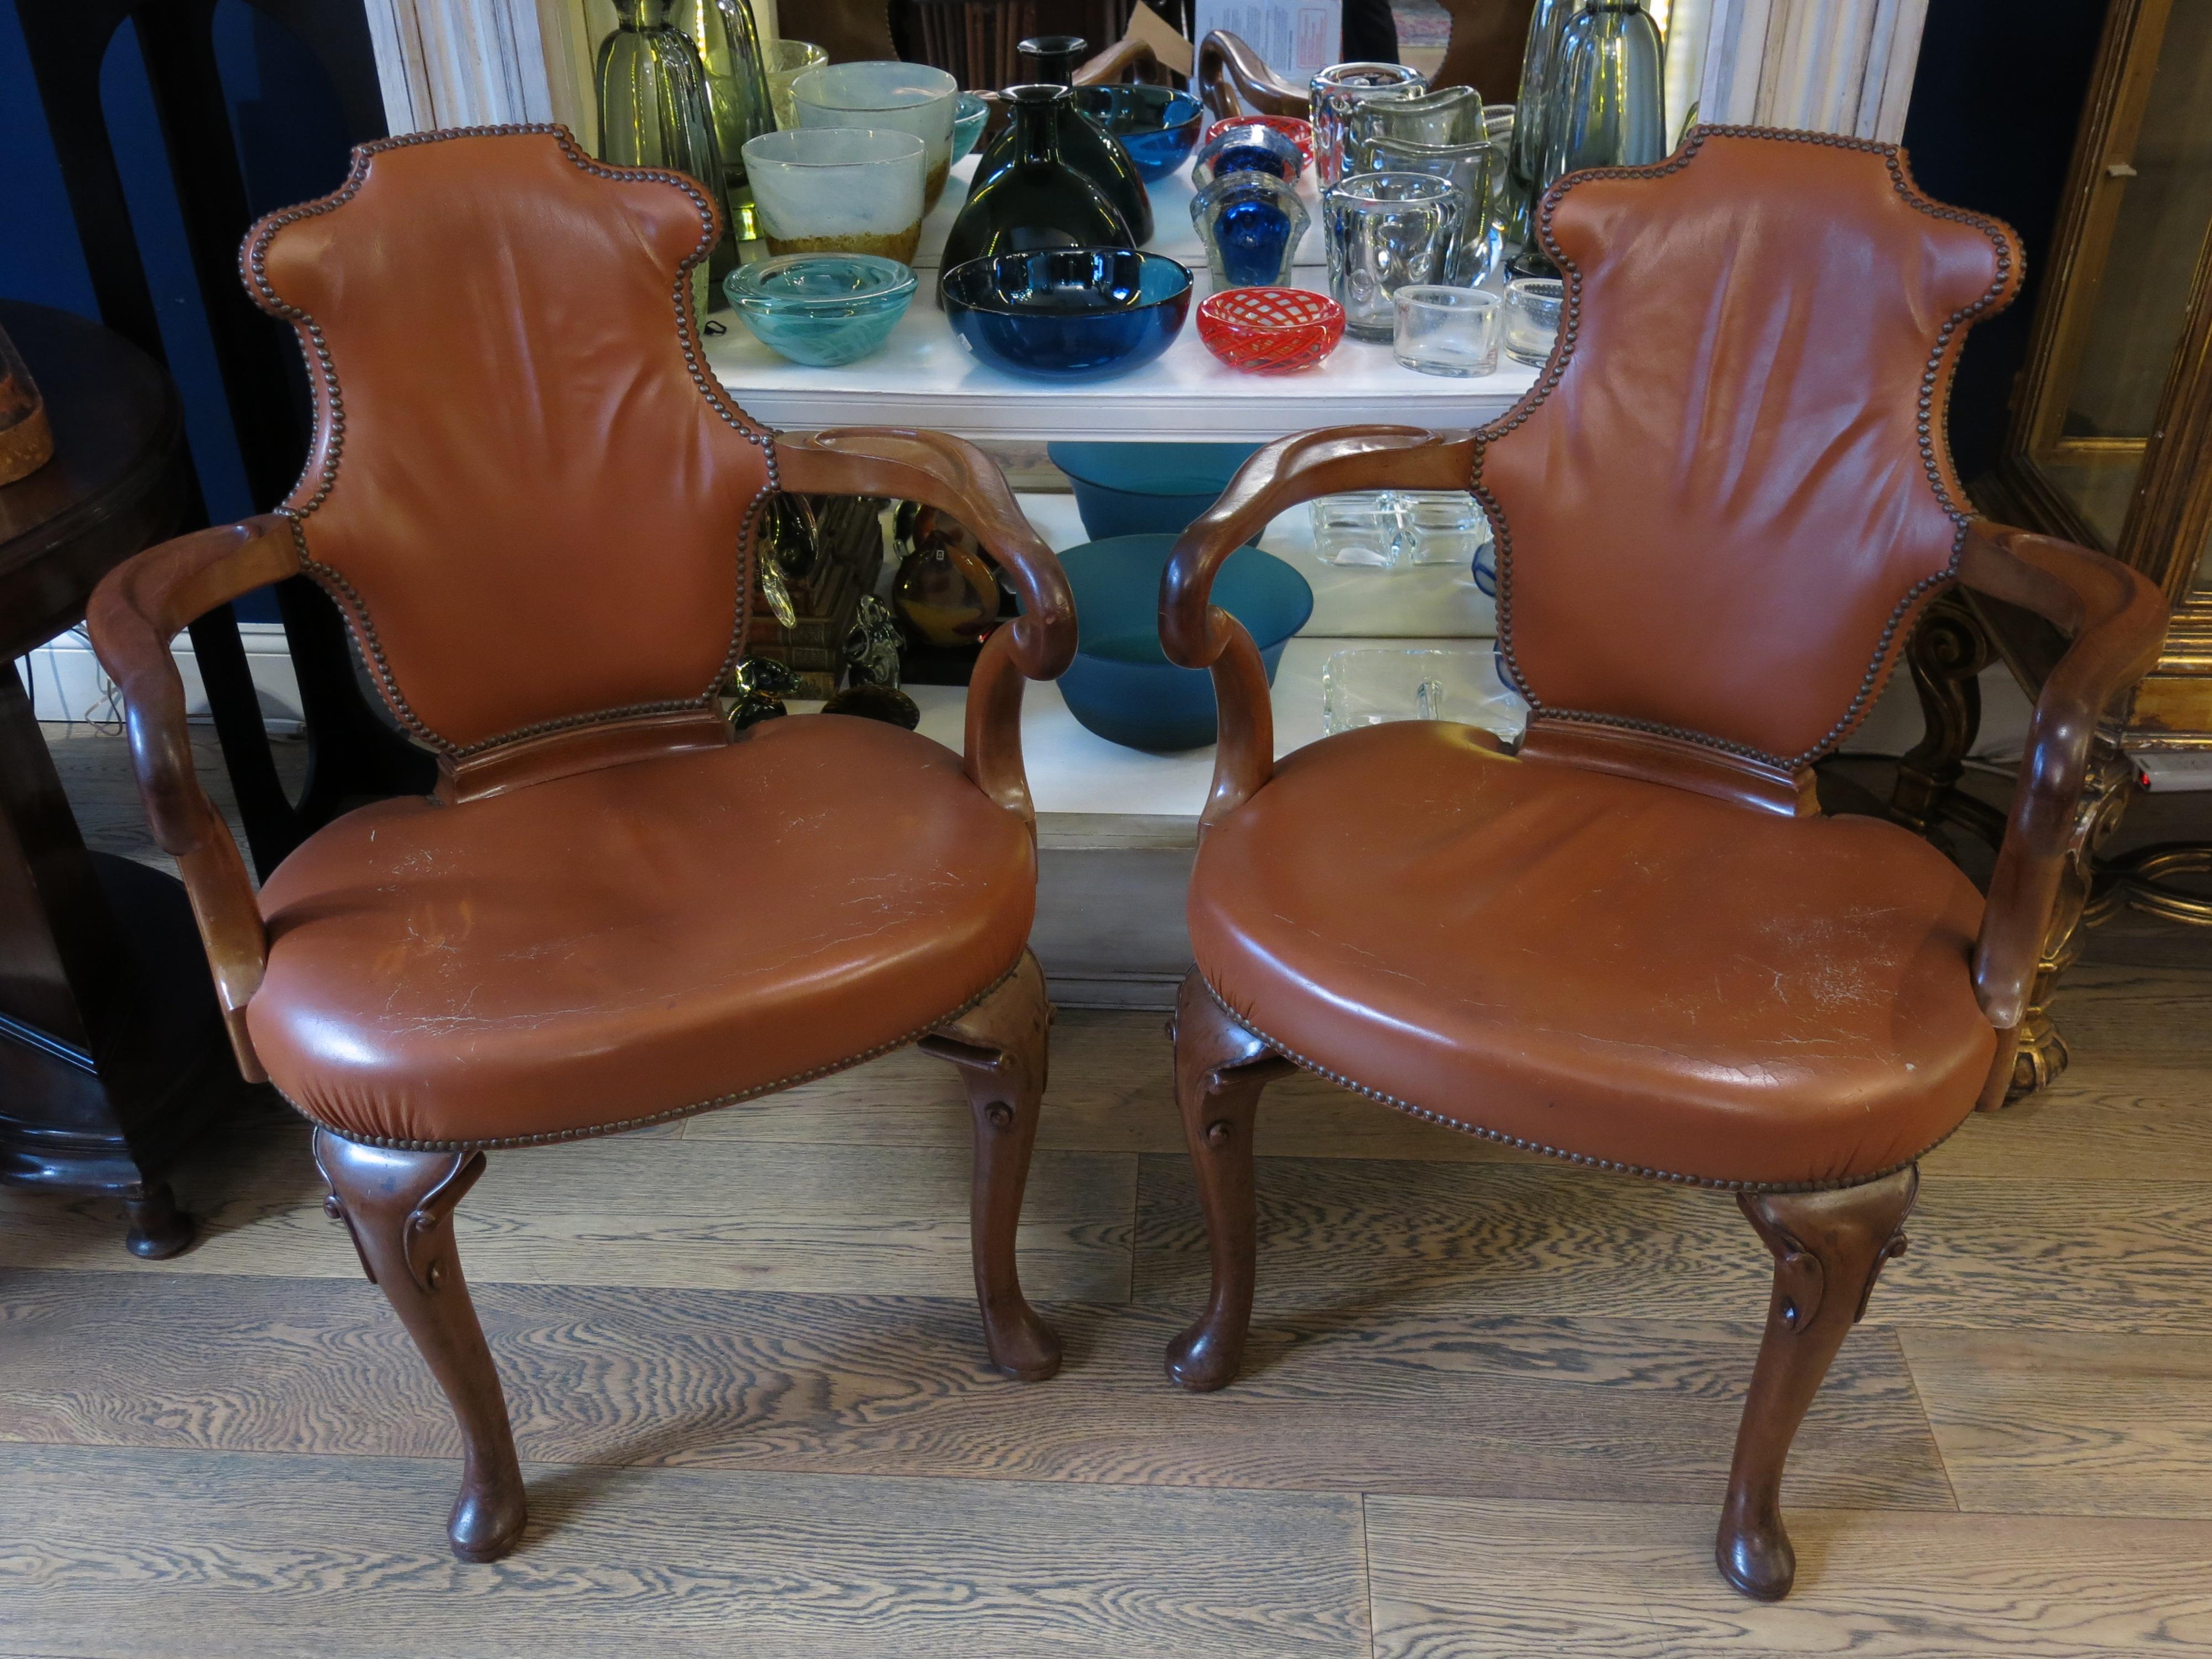 Step into luxurious comfort with this exquisite pair of Queen Anne style leather armchairs. These timeless pieces exude sophistication and elegance, embodying the classic charm of the Queen Anne aesthetic. In very good condition, they boast a rich